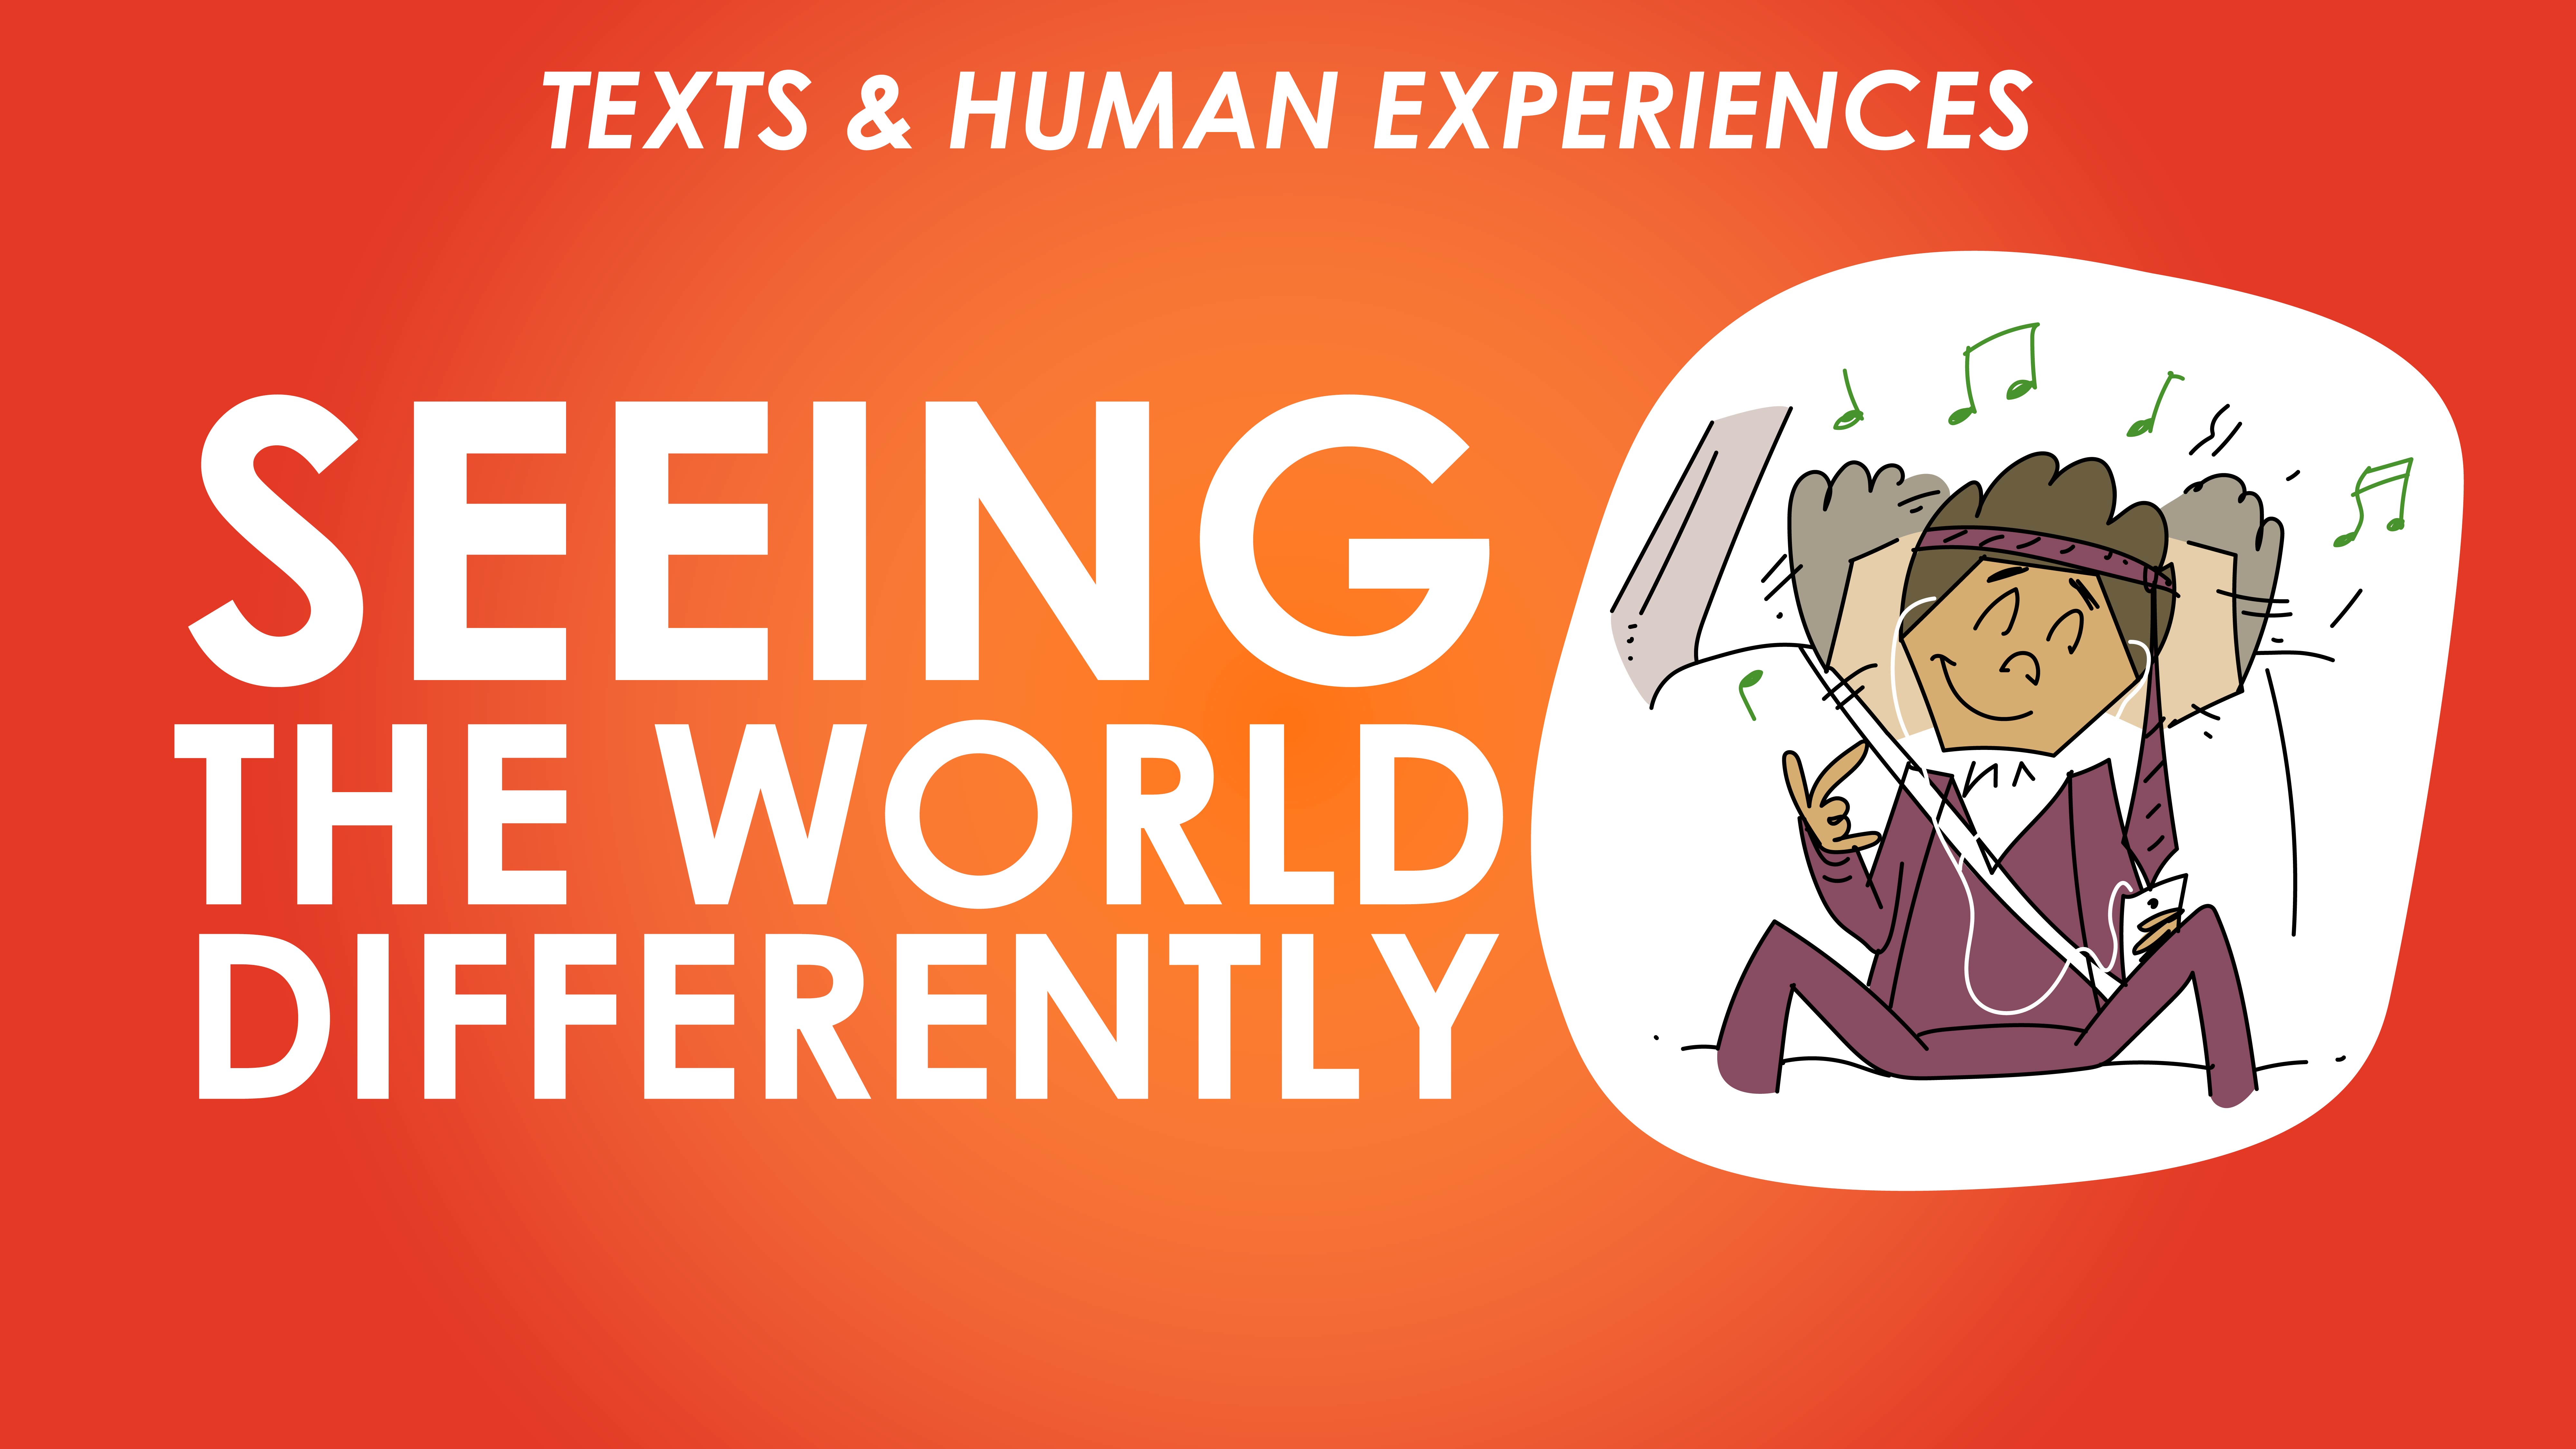 4. HSC Texts and Human Experiences - Seeing the World Differently